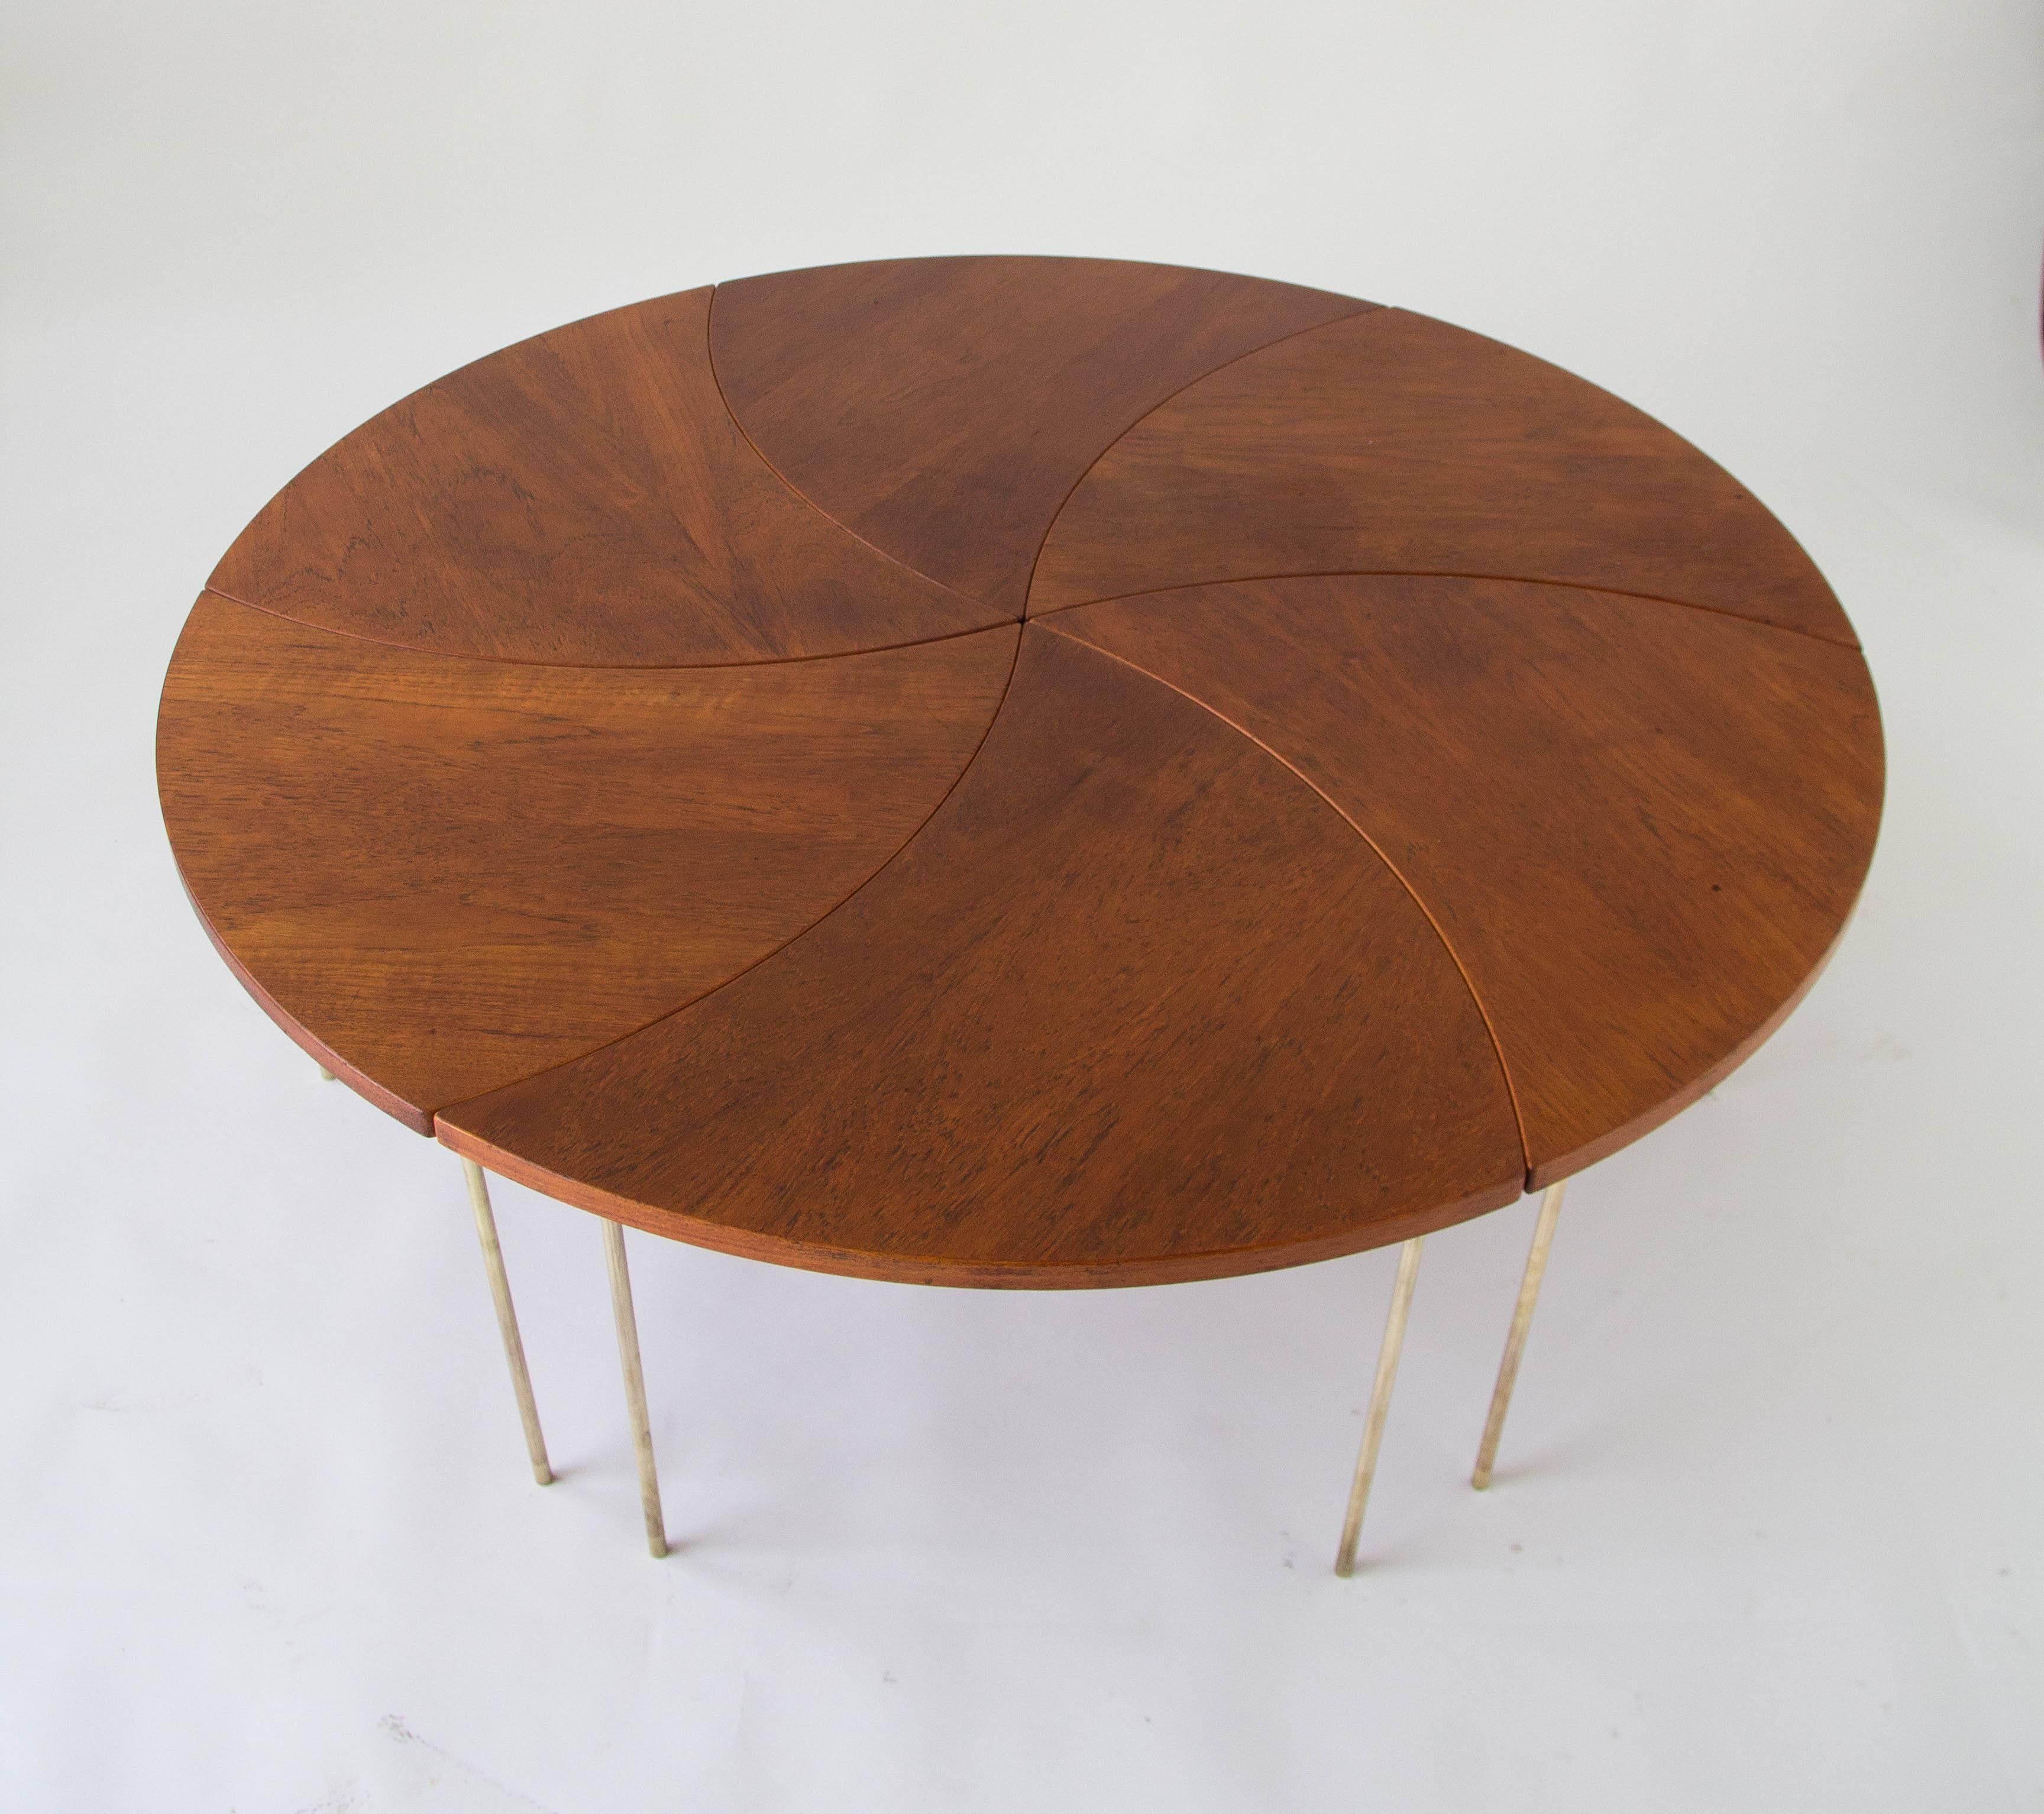 A set of six modular Model FD523 tables by Peter Hvidt and Orla Mølgaard-Nielsen for France & Daverkosen in 1952. The table, which has a teak top and slender brass legs, was imported to the United States by John Stuart of Grand Rapids. The segmented